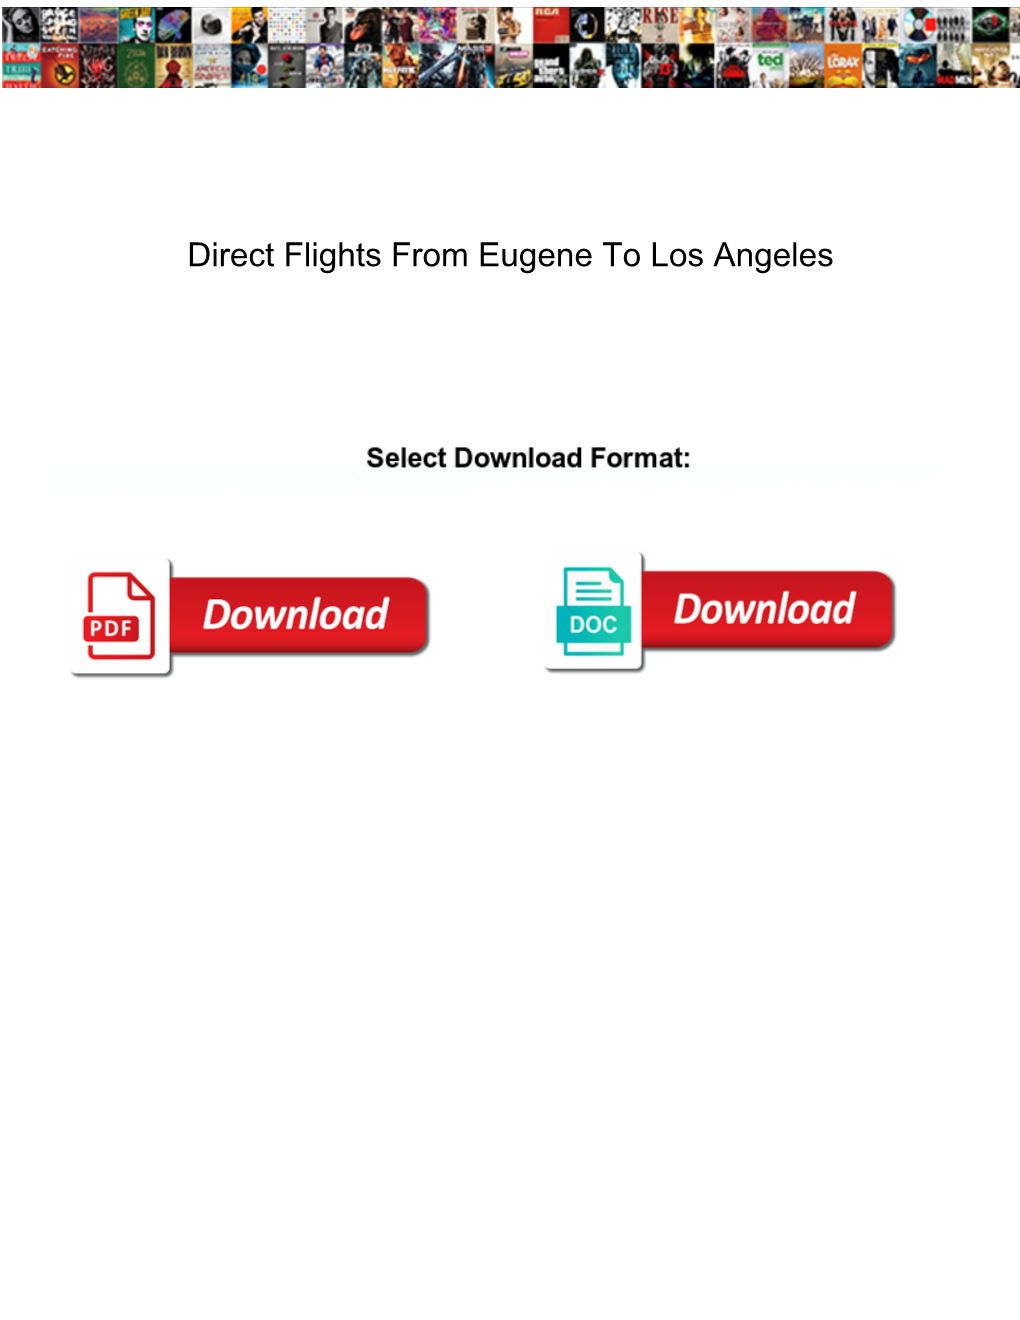 Direct Flights from Eugene to Los Angeles